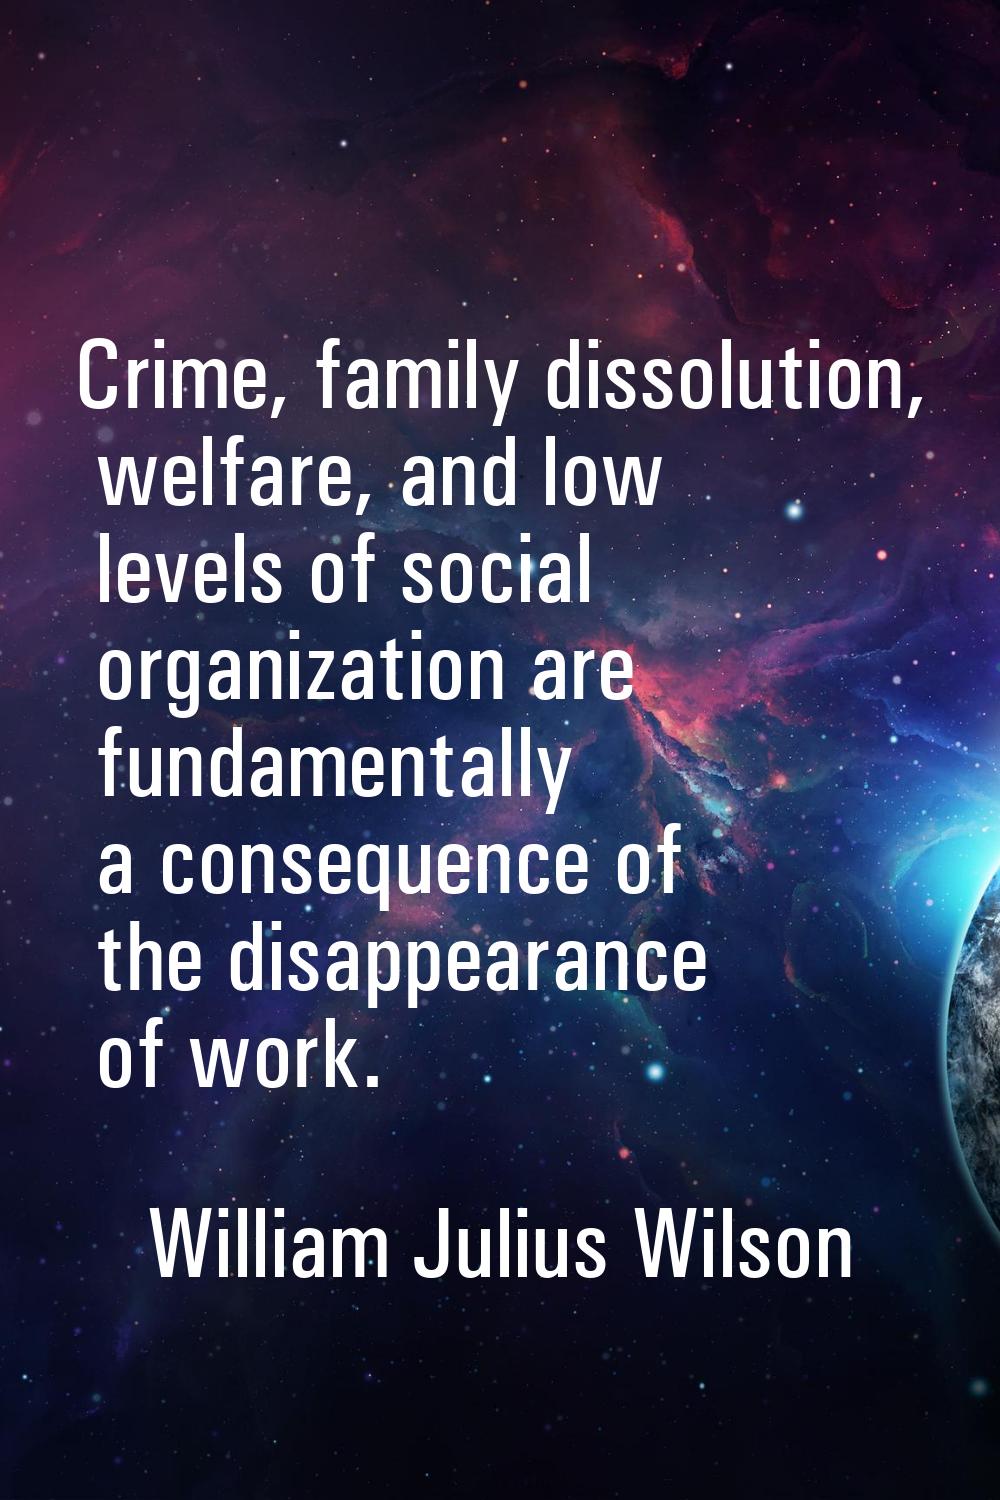 Crime, family dissolution, welfare, and low levels of social organization are fundamentally a conse